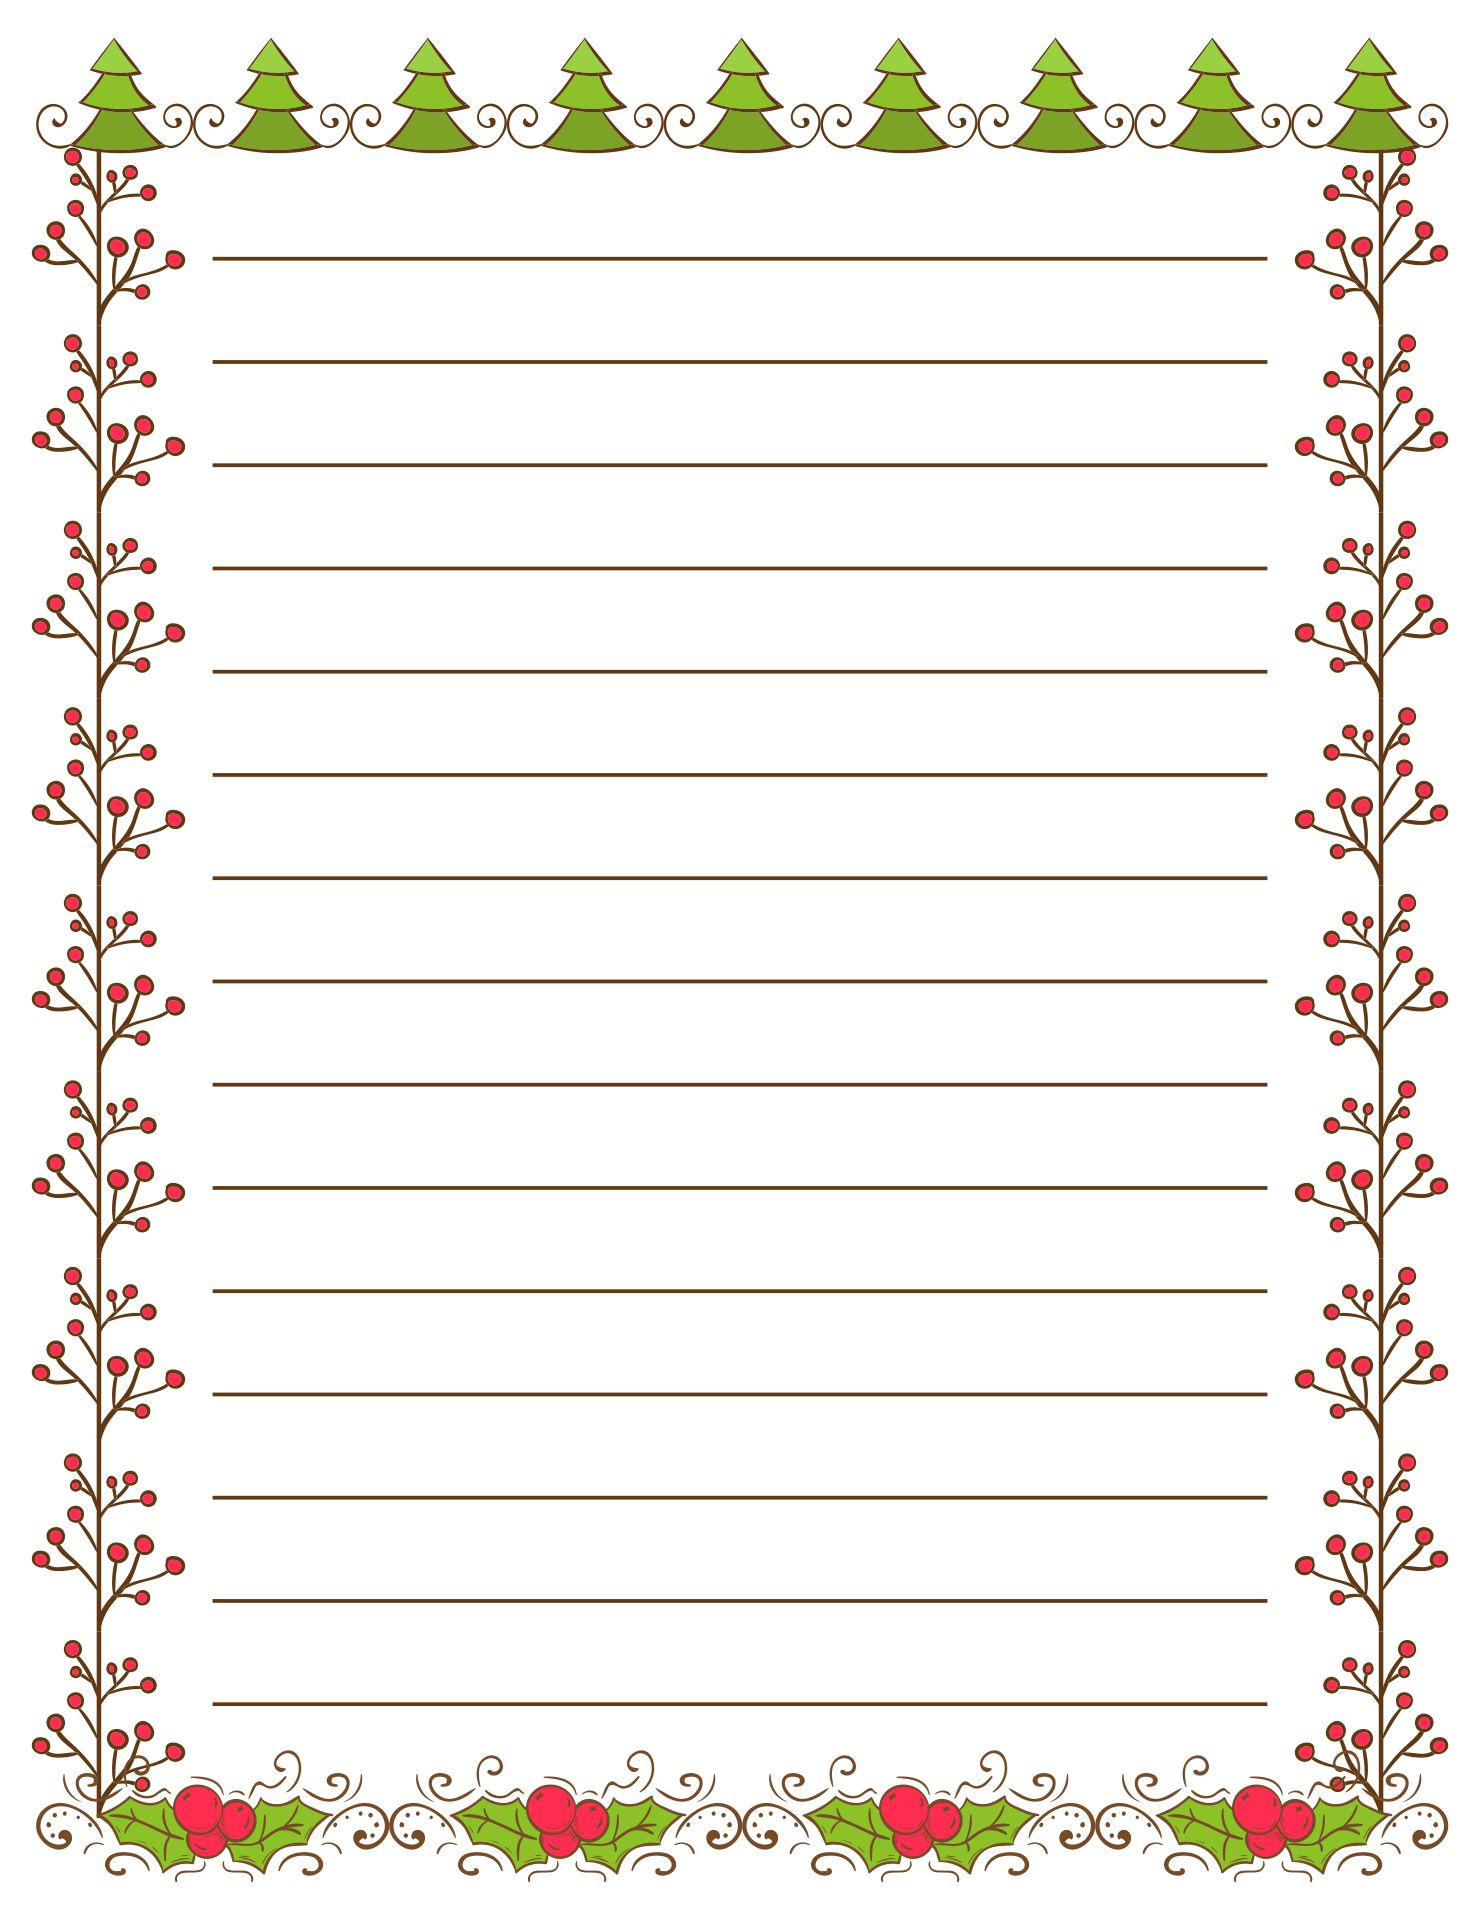 6 Best Images of Christmas Writing Paper Template Printable Christmas